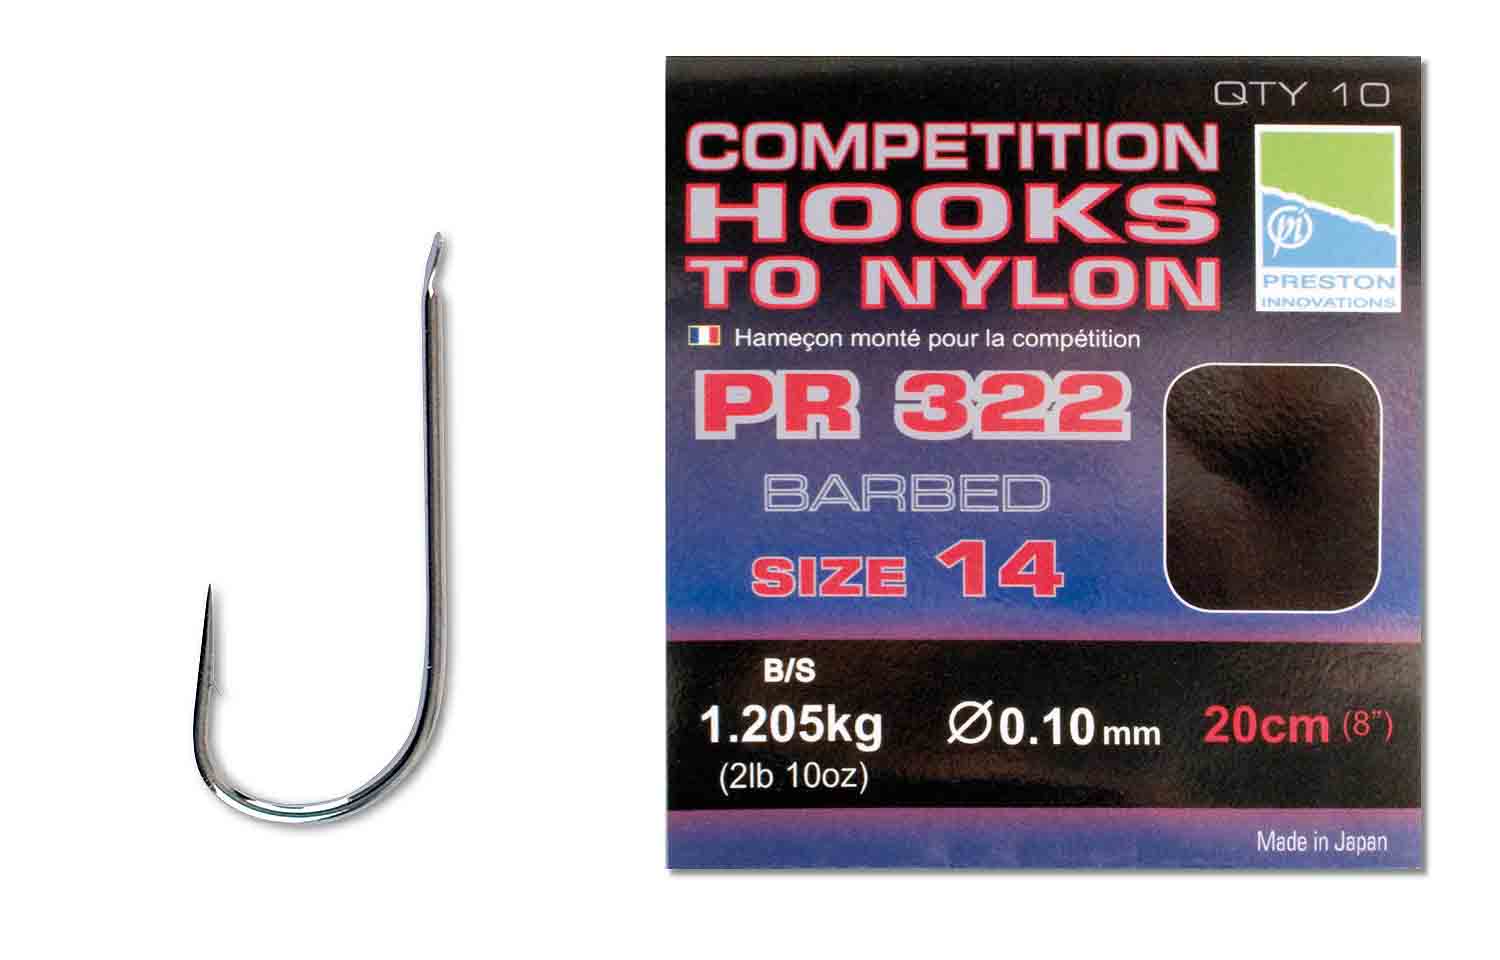 Image of barbed PR Competition Hooks to Nylon by  Innovations